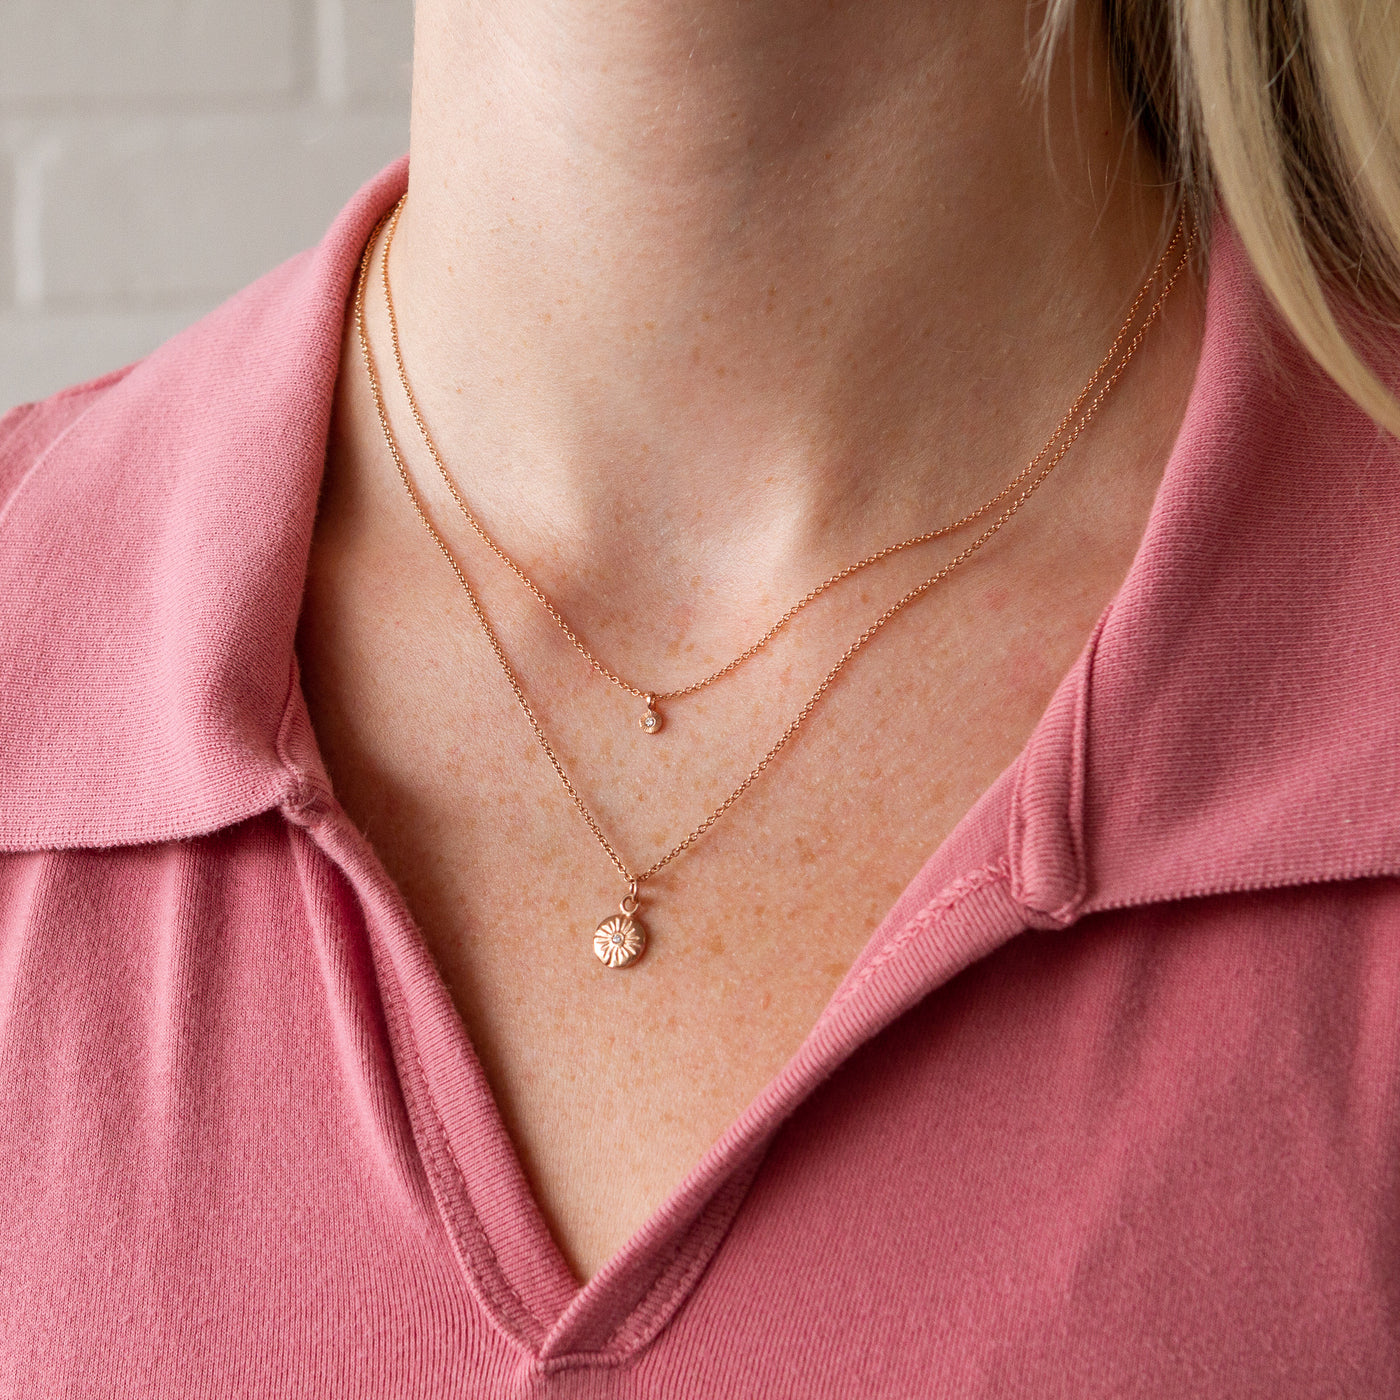 A model wears a 14k rose gold lucia neckalce paired with a rose gold rise necklace and a pink polo shirt